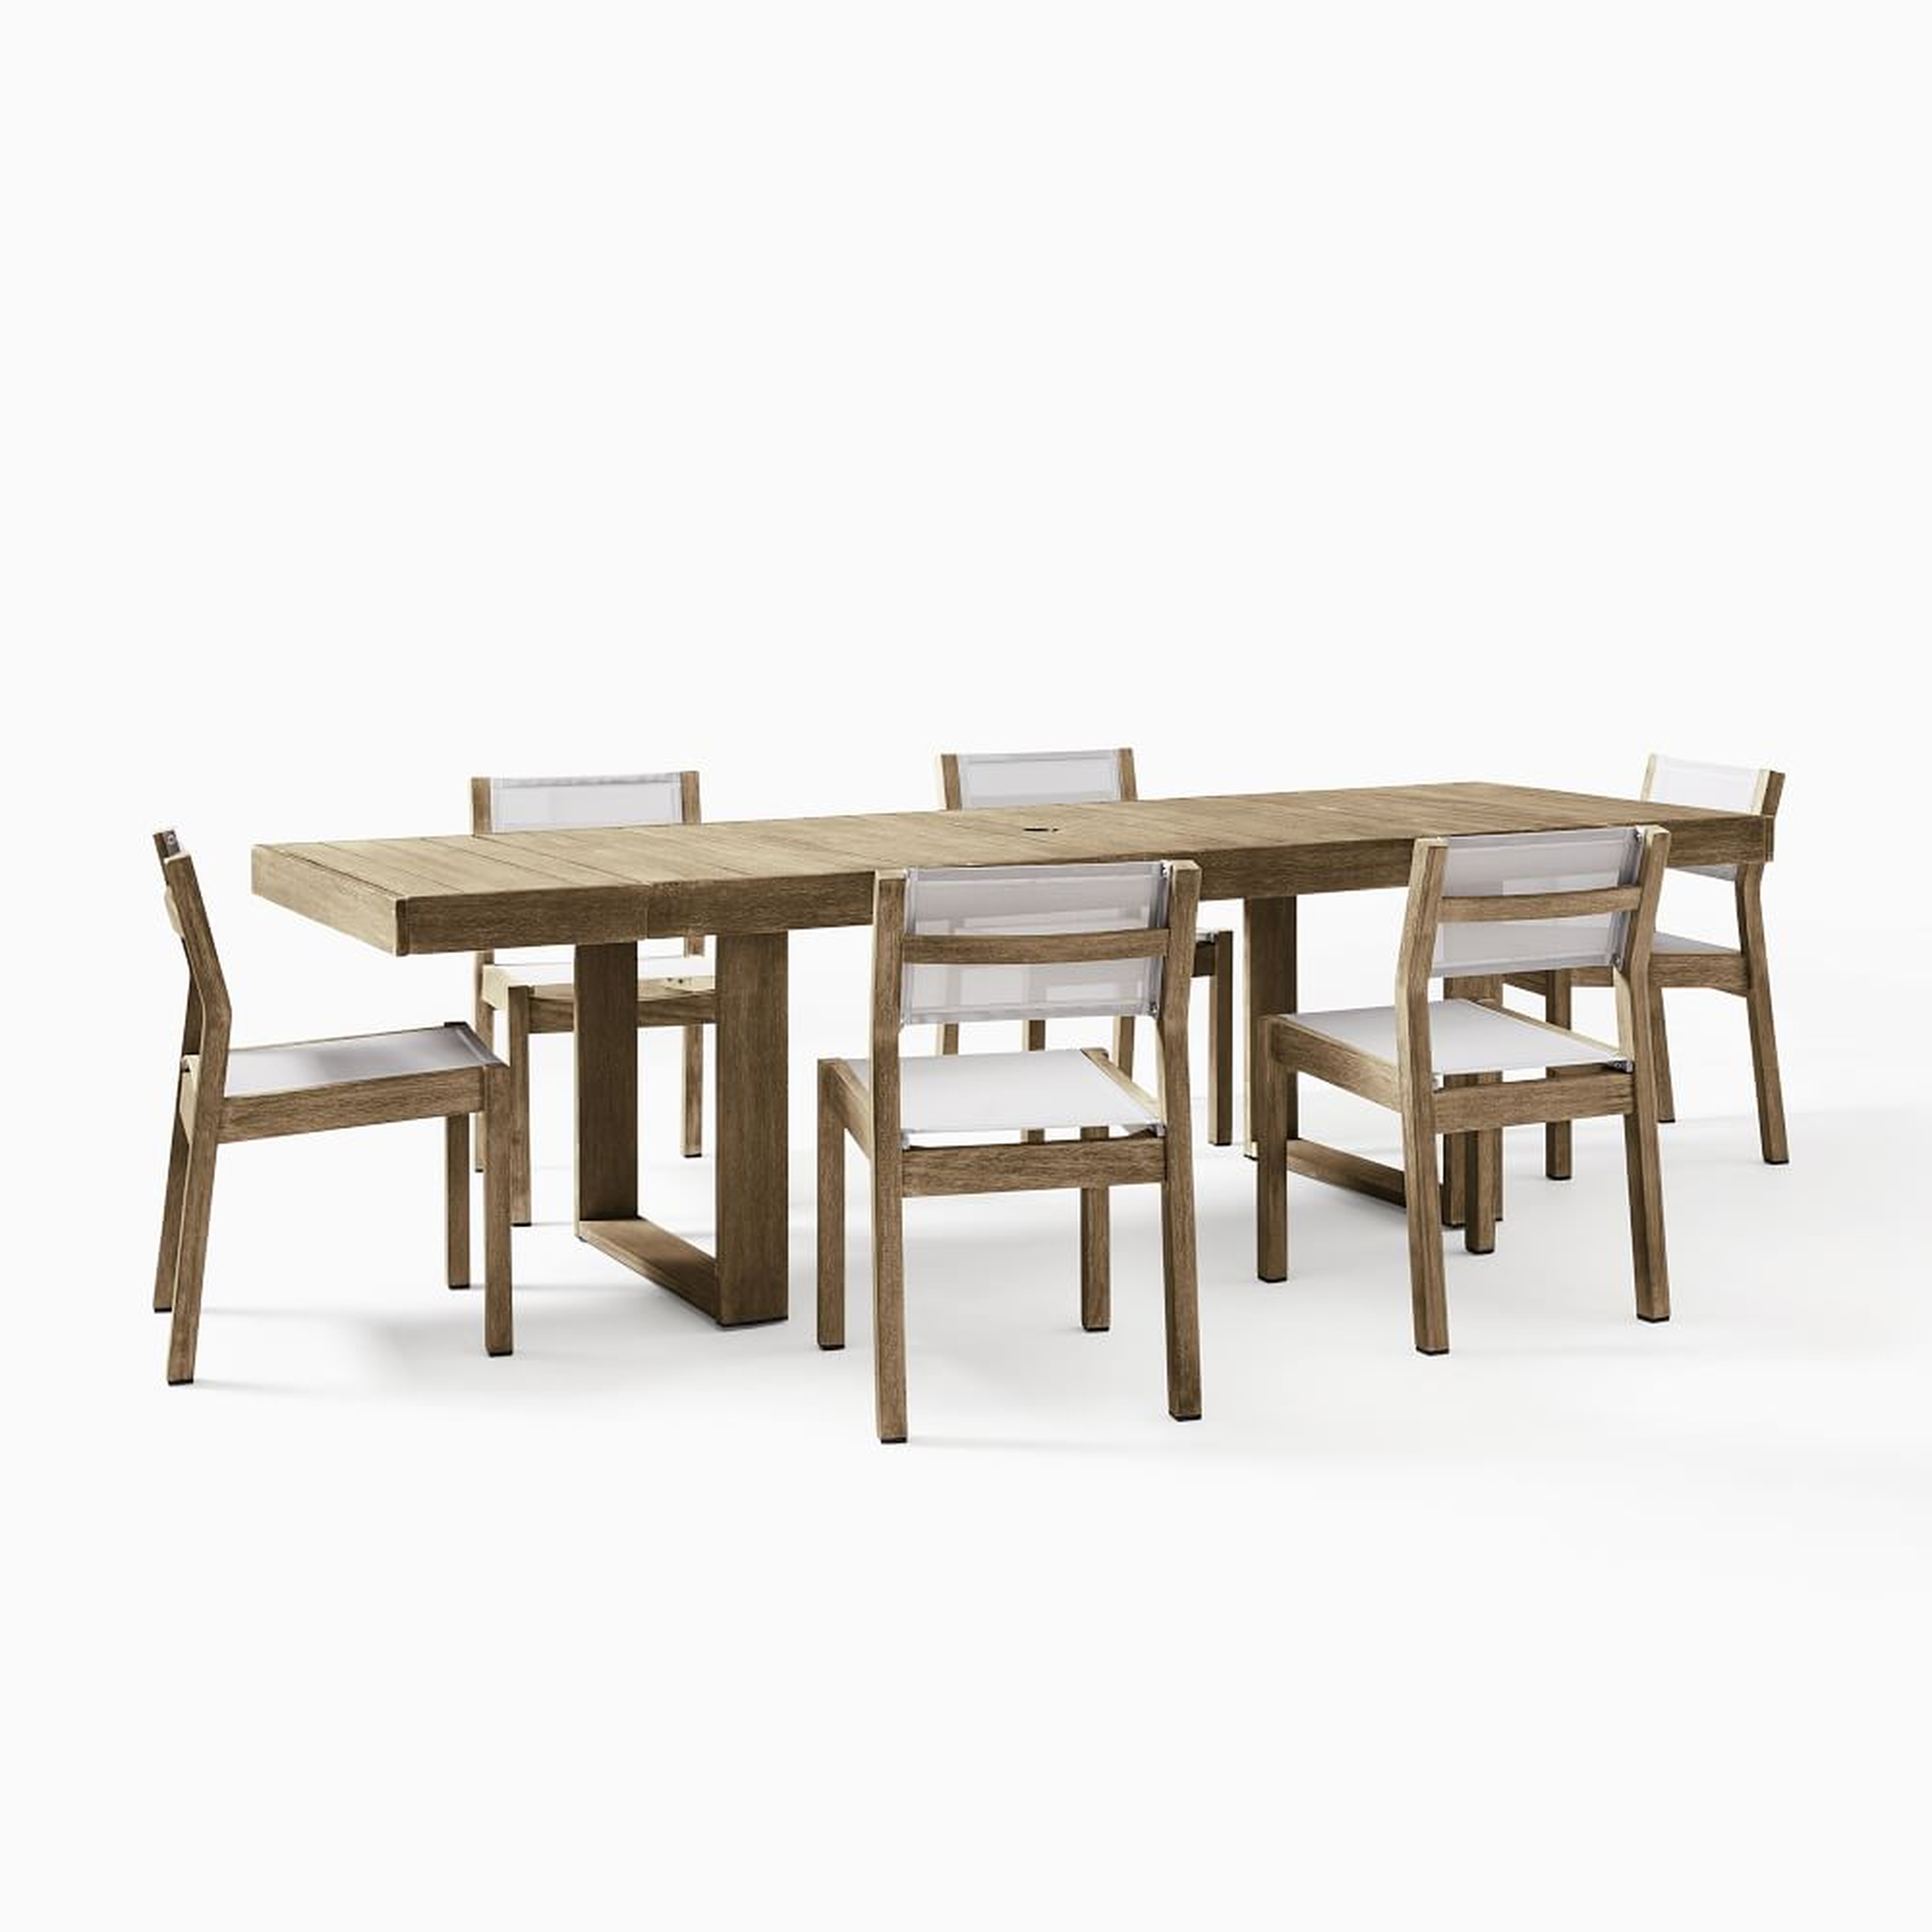 Portside Outdoor Expandable Dining Table + 6 Textilene Chairs Set, Driftwood - West Elm